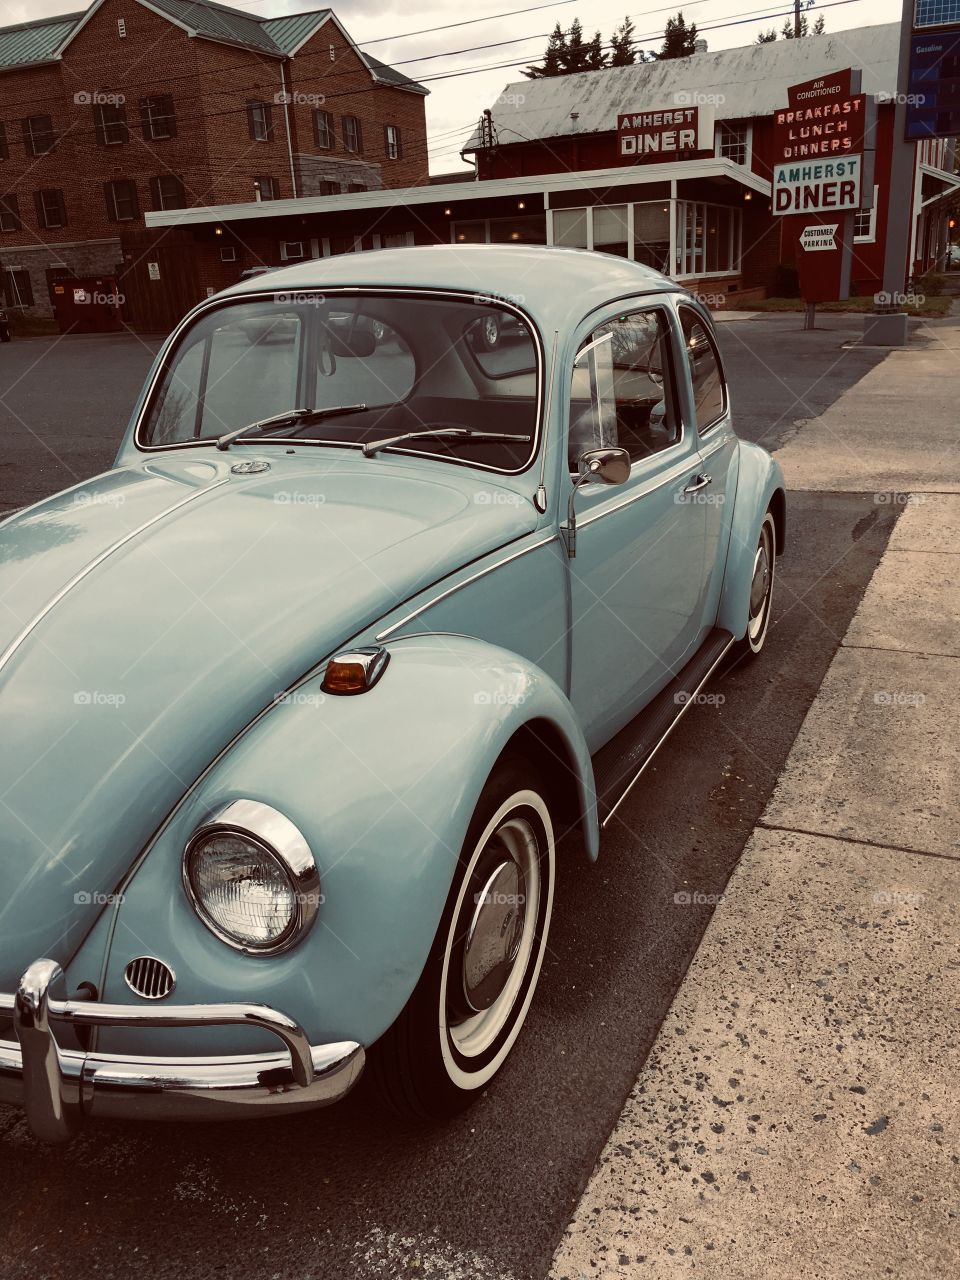 I saw this Volkswagen Beetle bug on the side of the road and had to stop and take a picture. It is just like the one we had when I was little. The diner  and sign in the background made this picture look quite vintage.